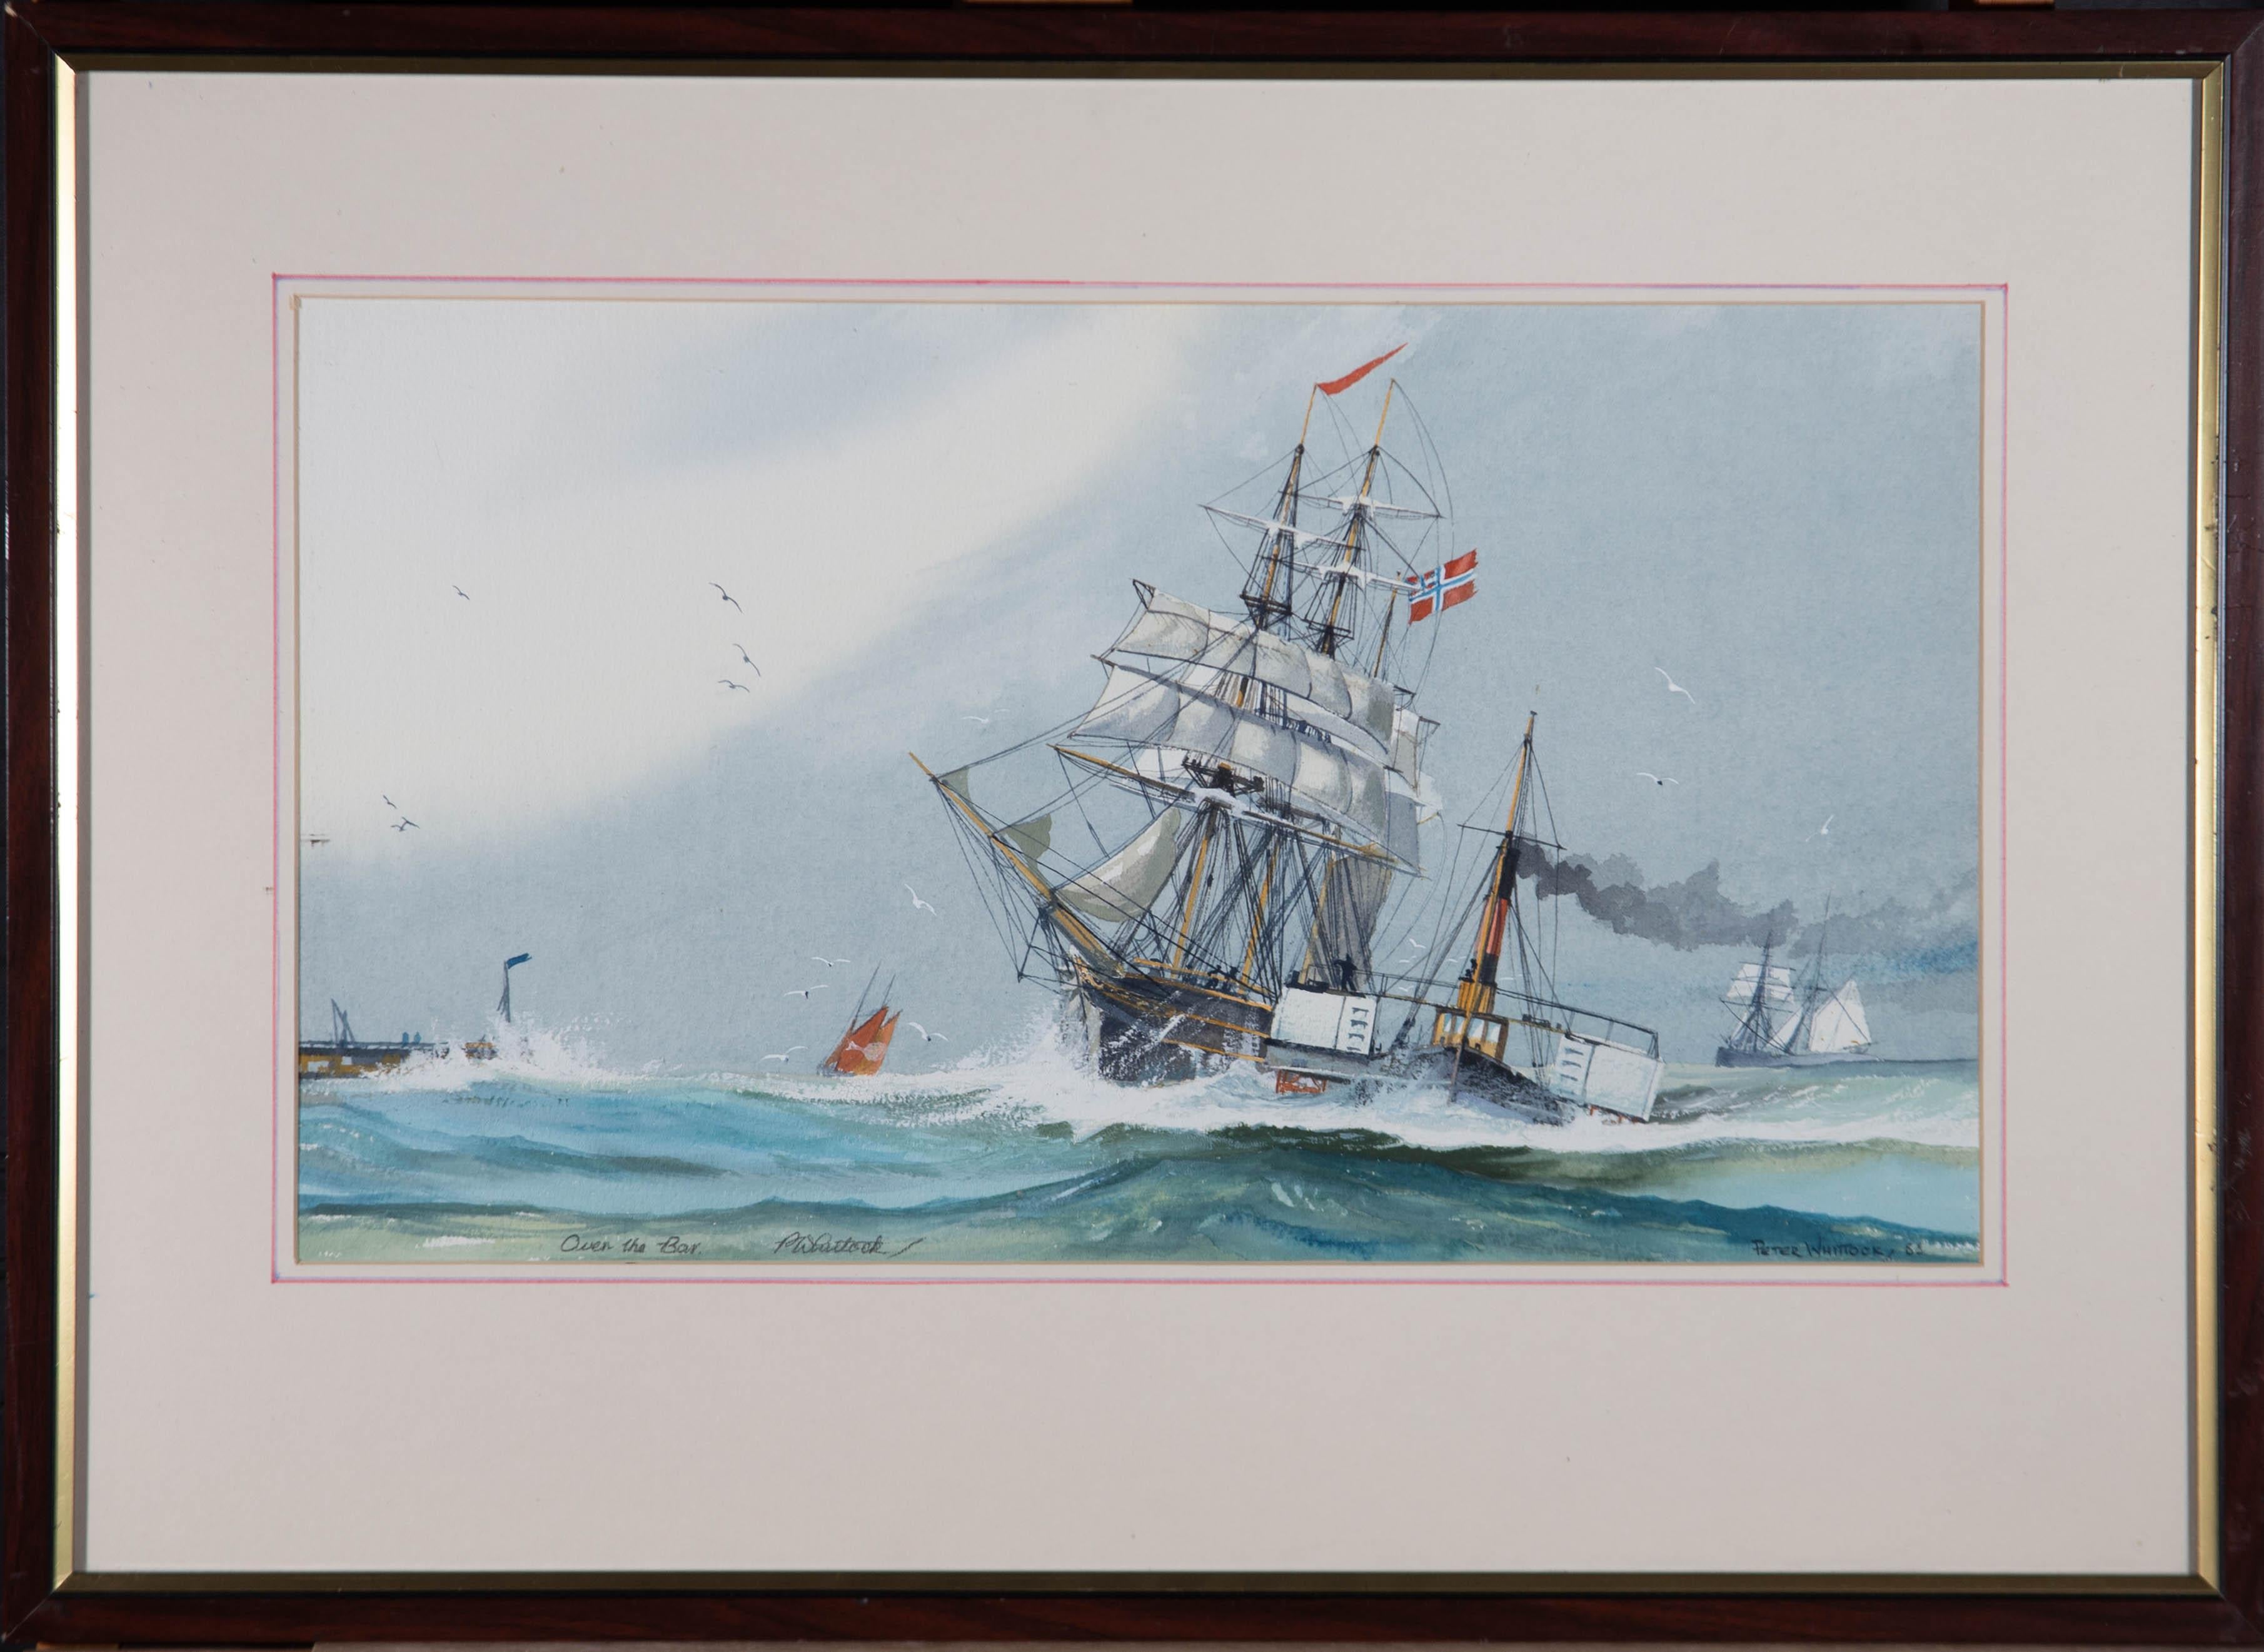 A lovely watercolour showing ships at sea with one flying the Norwegian Flag. Well presented in a lined mount and wooden frame with gilt trim. Inscribed with the title on the lower left and signed and dated to the lower right. On wove.
